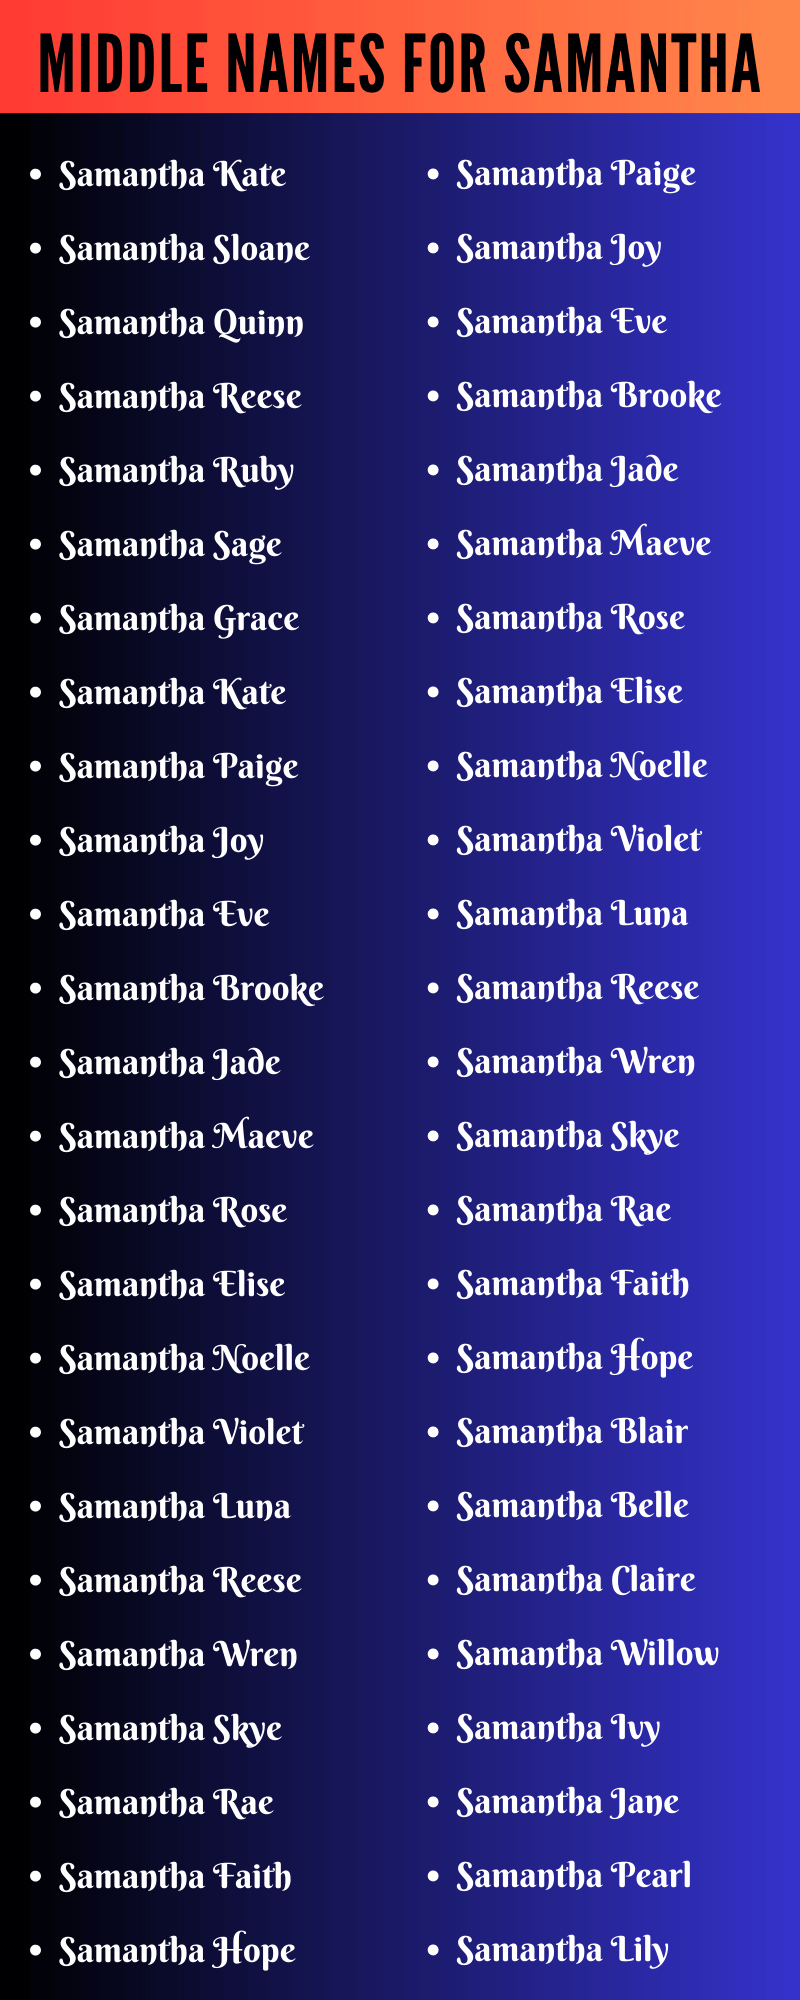 Middle Names For Samantha